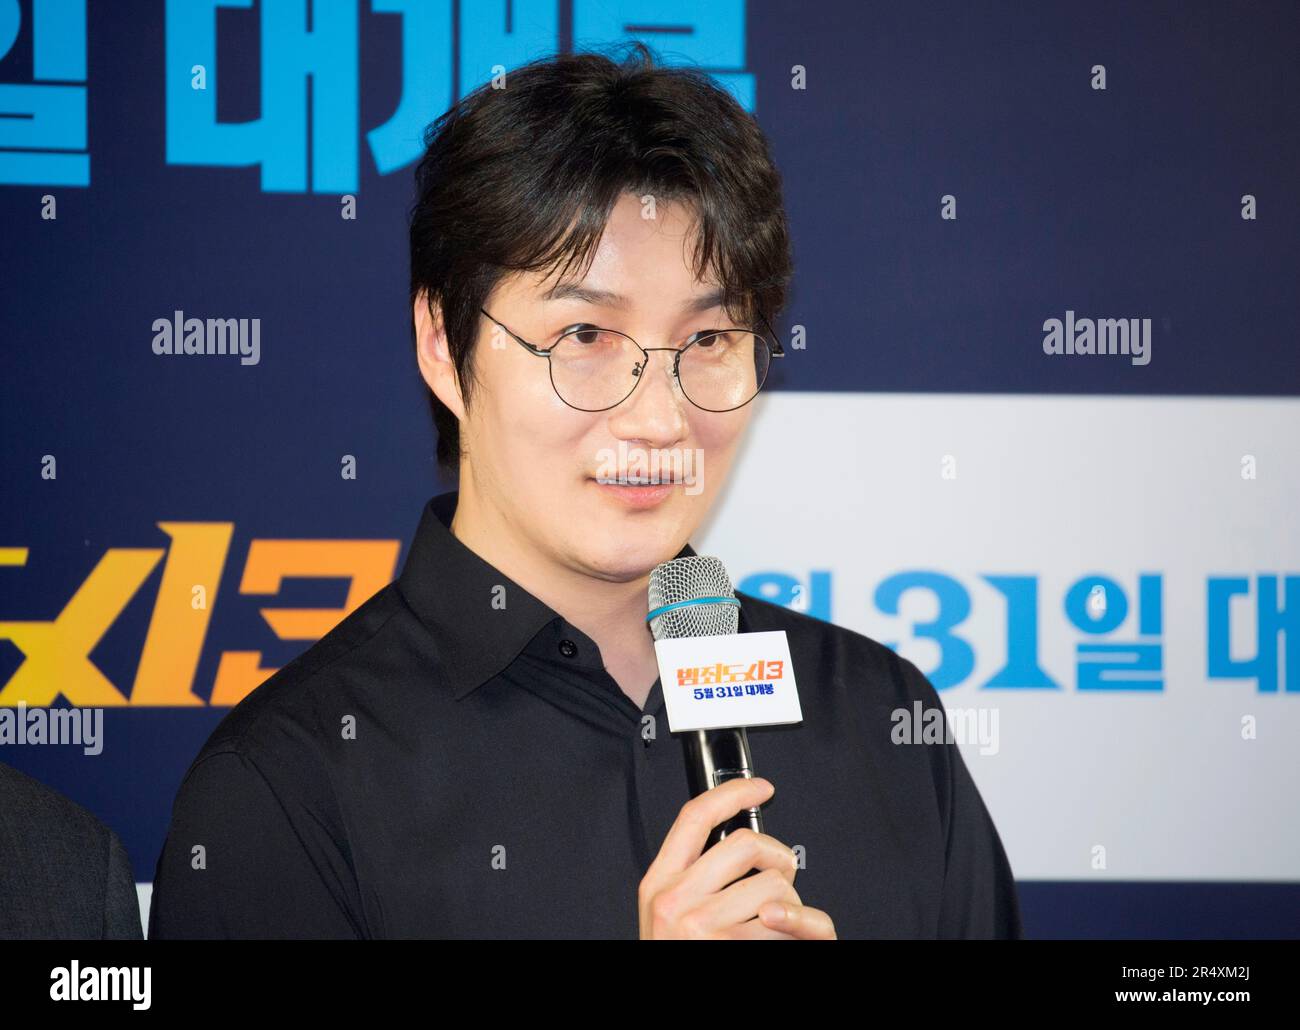 Heo Dong-Won, May 22, 2023 : South Korean actor Heo Dong-Won attends a photocall before a VIP preview of South Korean movie 'The Roundup: No Way Out' in Seoul, South Korea. 'The Roundup: No Way Out', the third installment of 'The Outlaws' series will hit local theaters on May 31. Credit: Lee Jae-Won/AFLO/Alamy Live News Stock Photo